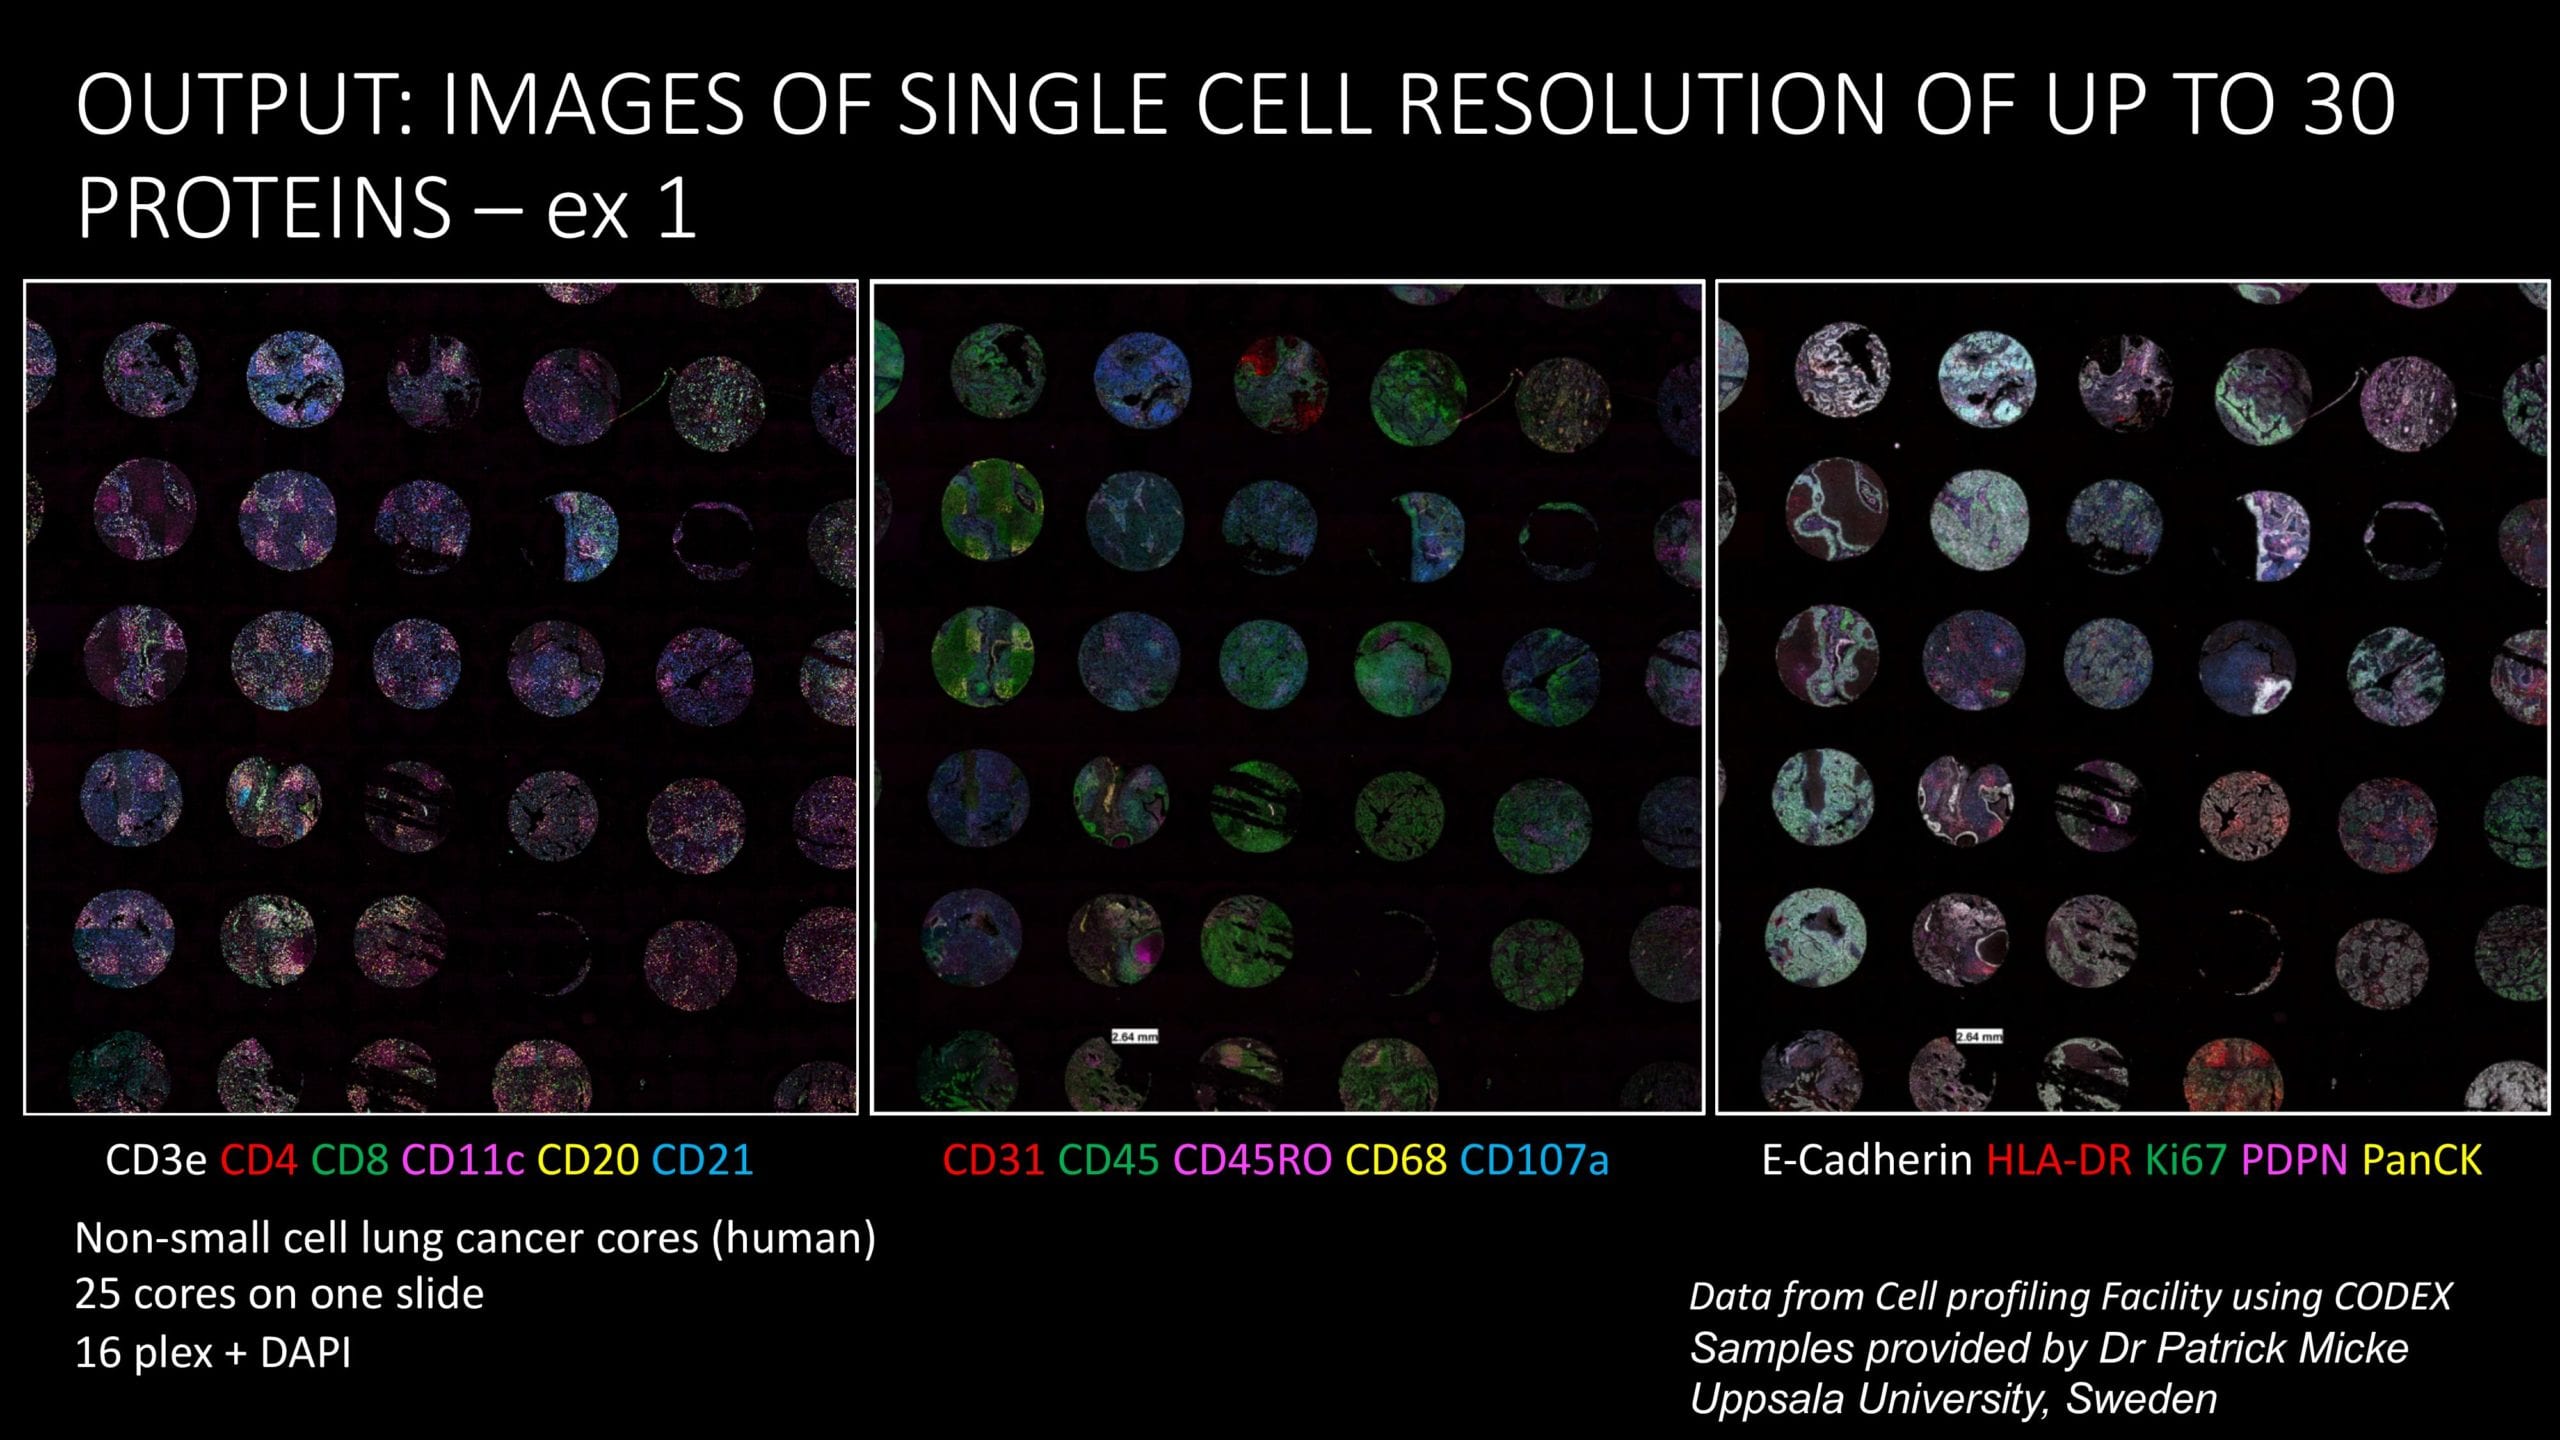 Images of single-cell resolution of up to 30 proteins. Non-small cell lung cancer cores (human). 25 cores on one slide. Data from Cell Profiling Facility using CODEX. Samples provided by Dr. Patrick Micke, Uppsala University, Sweden.